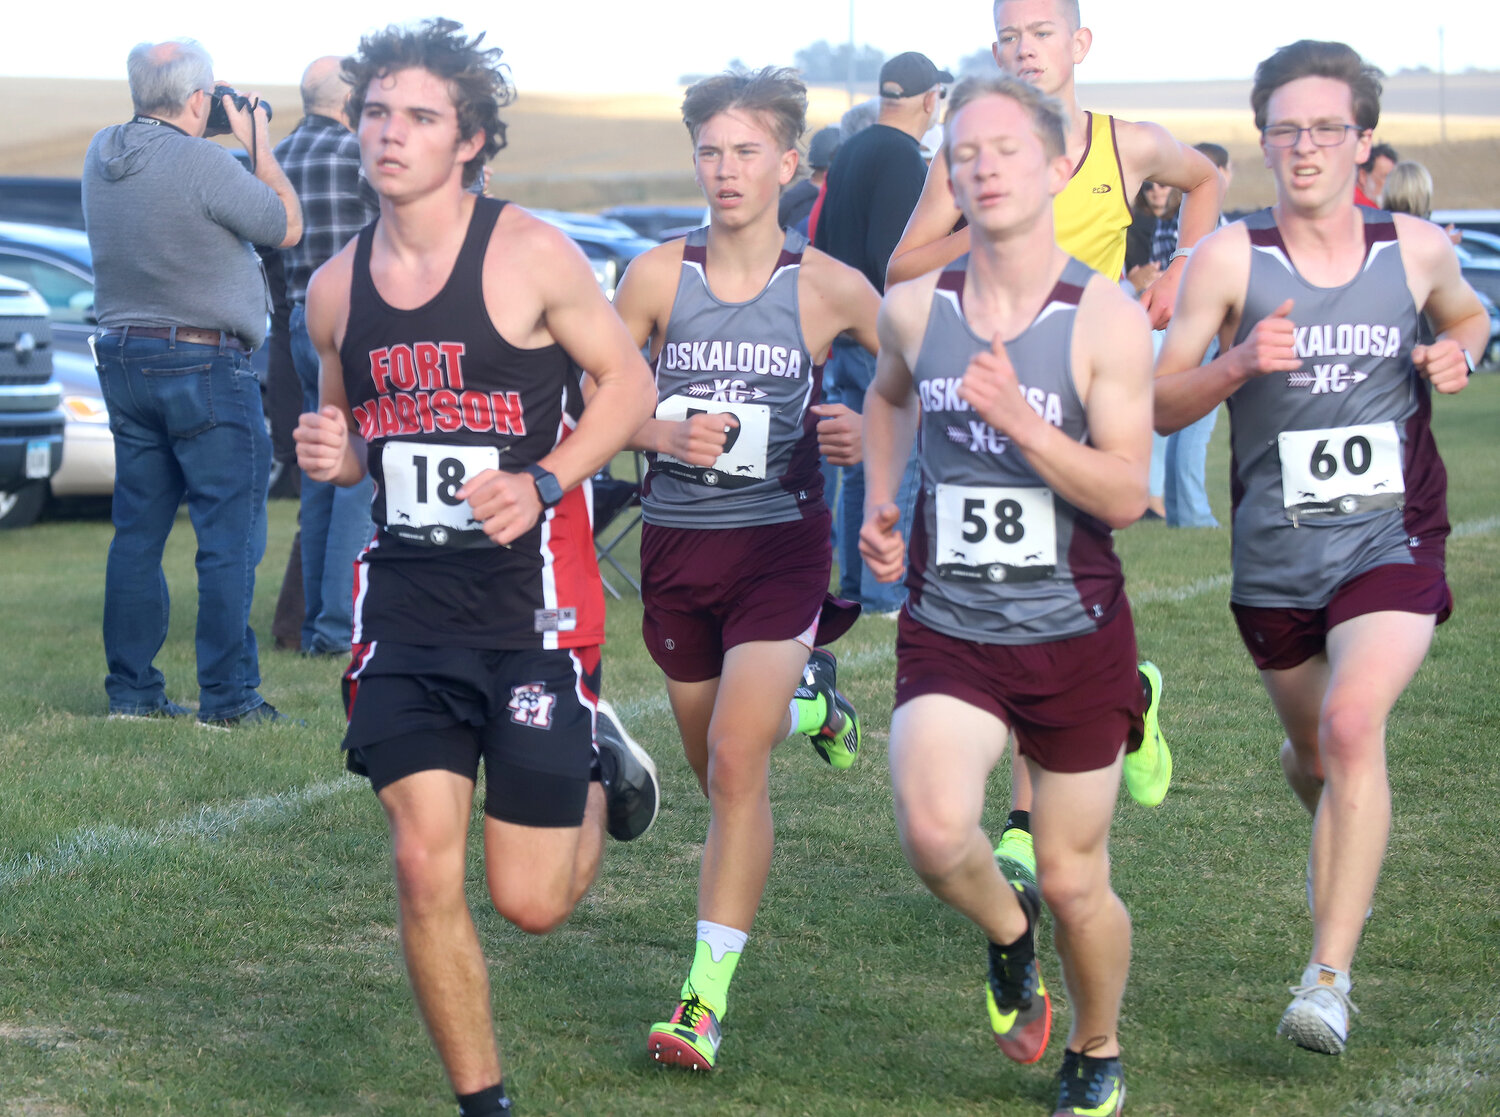 Mason McLey runs in the mix at the halfway point of Wednesday's state qualifier in Pella. McLey didn't qualify for next week's state meet in Fort Dodge.